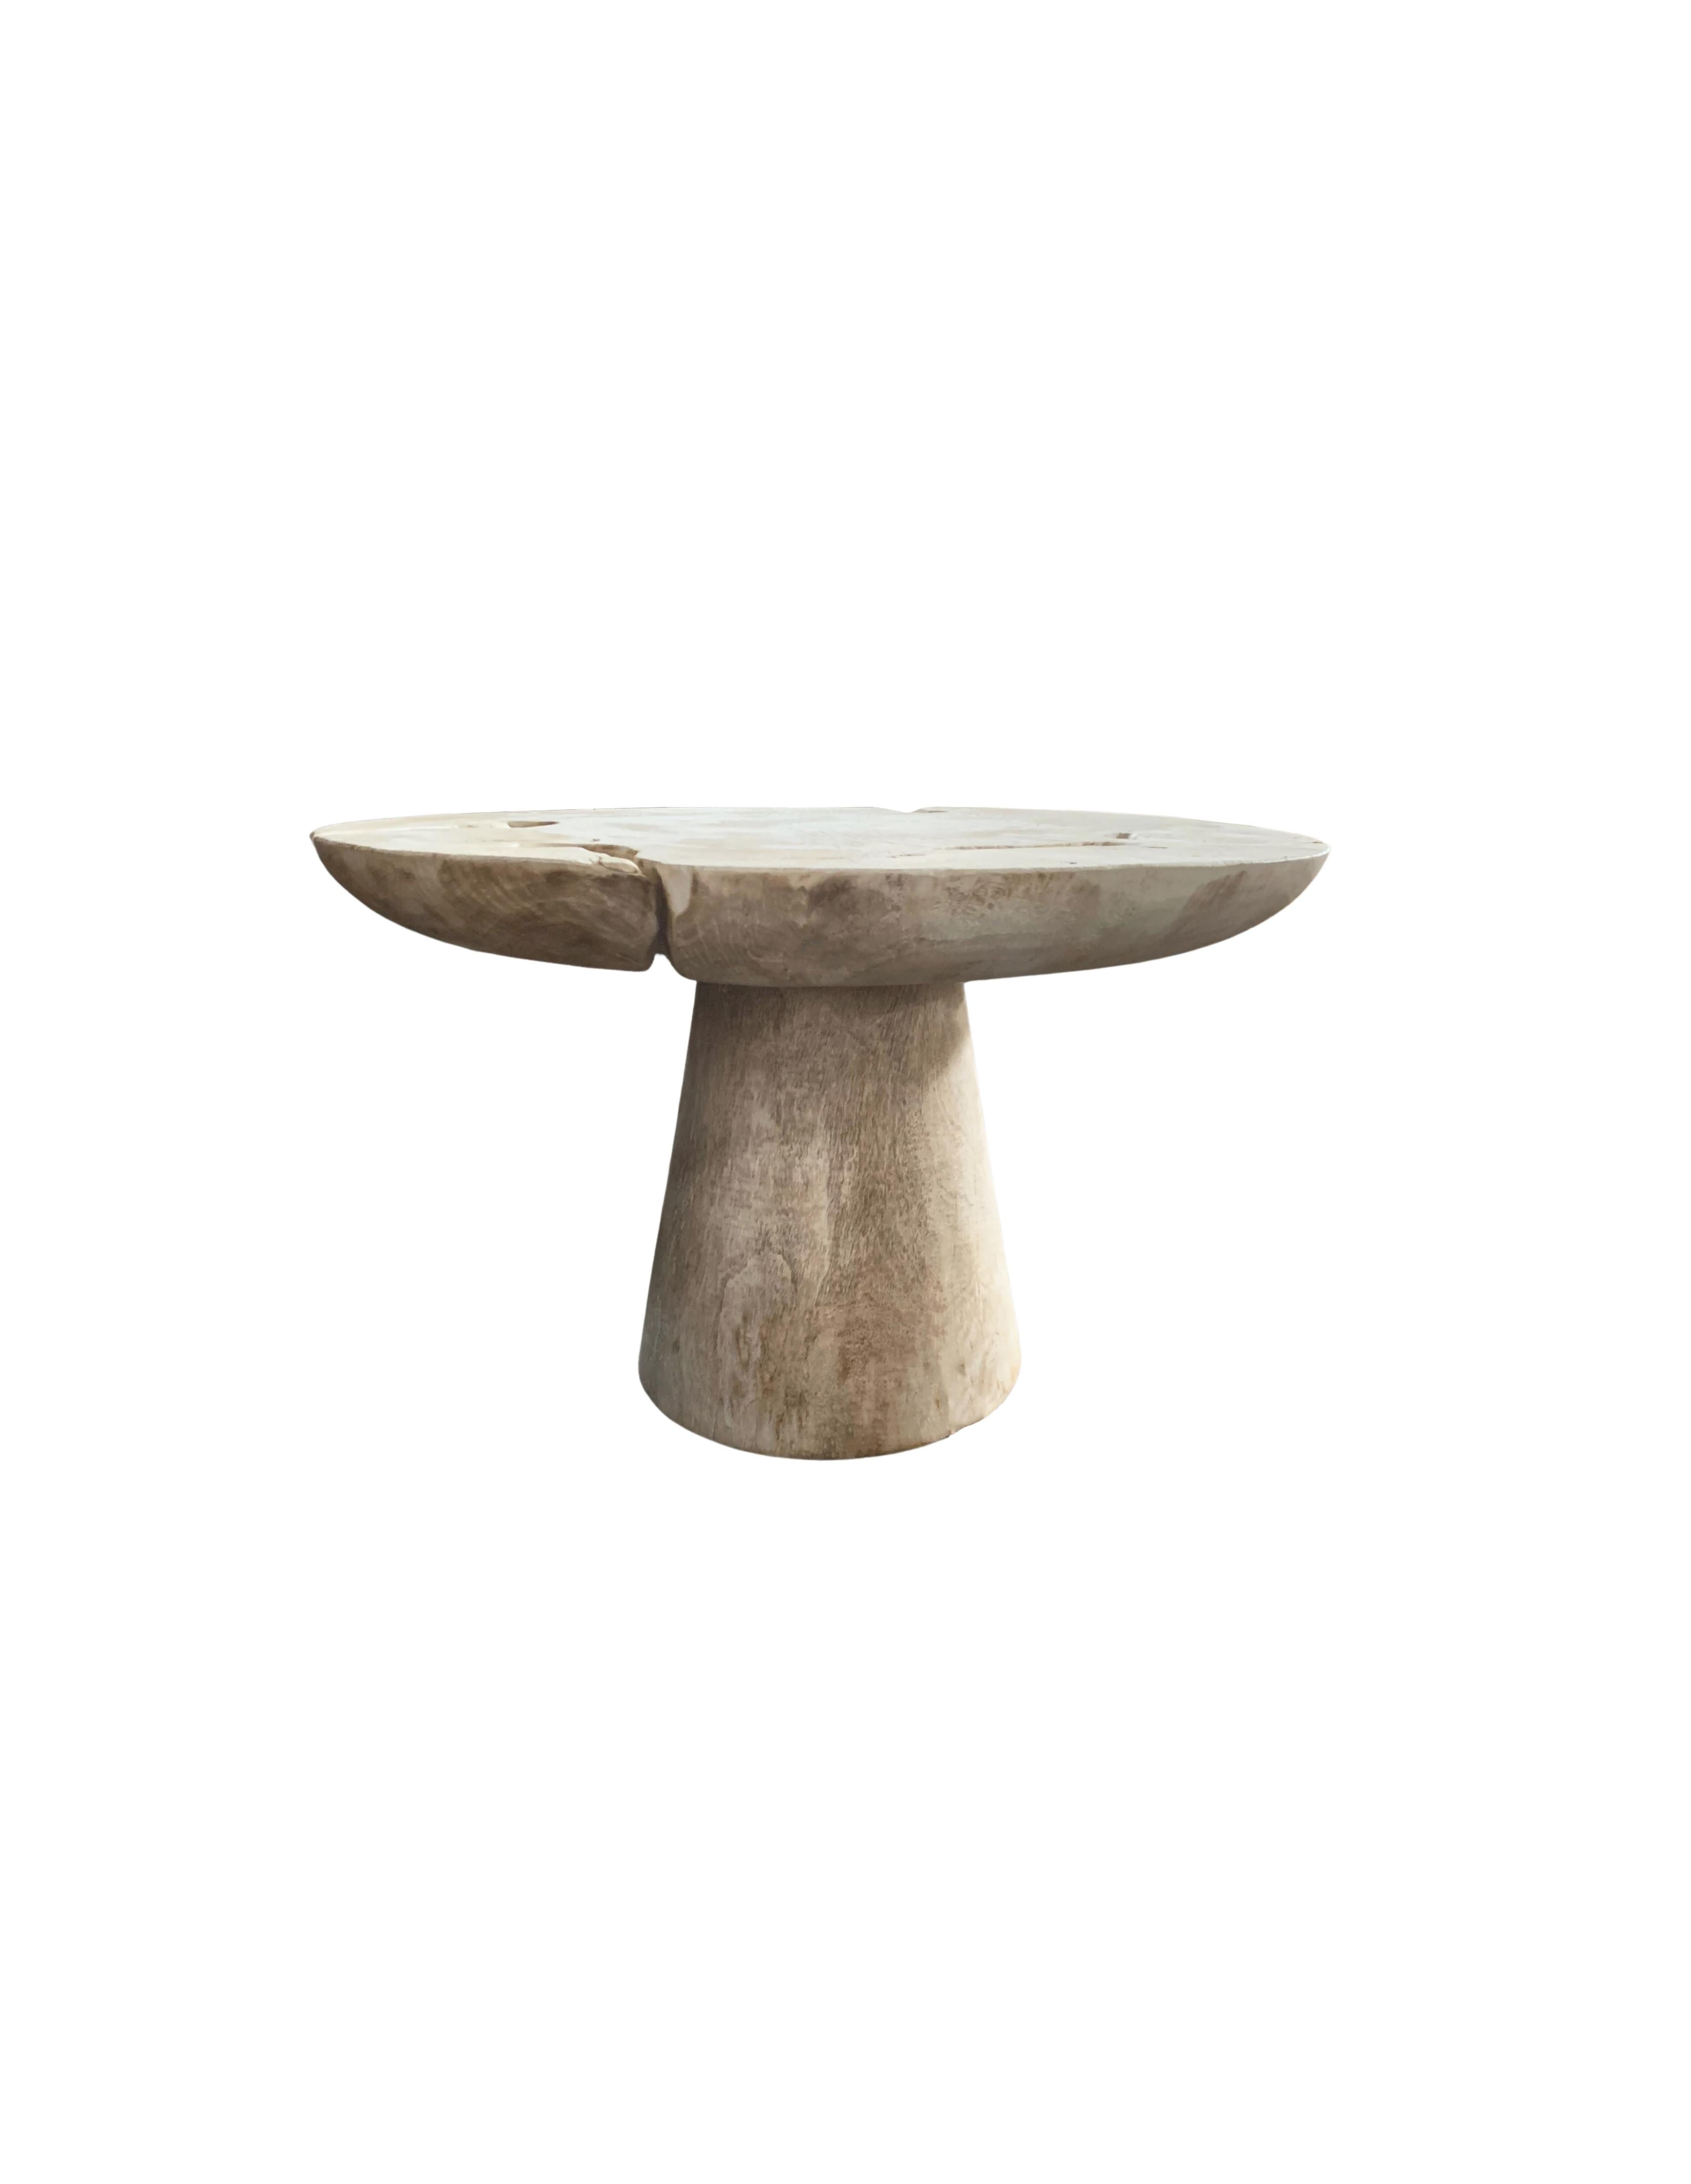 Hand-Crafted Sculptural Round Table Crafted from Mango Wood, Modern Organic